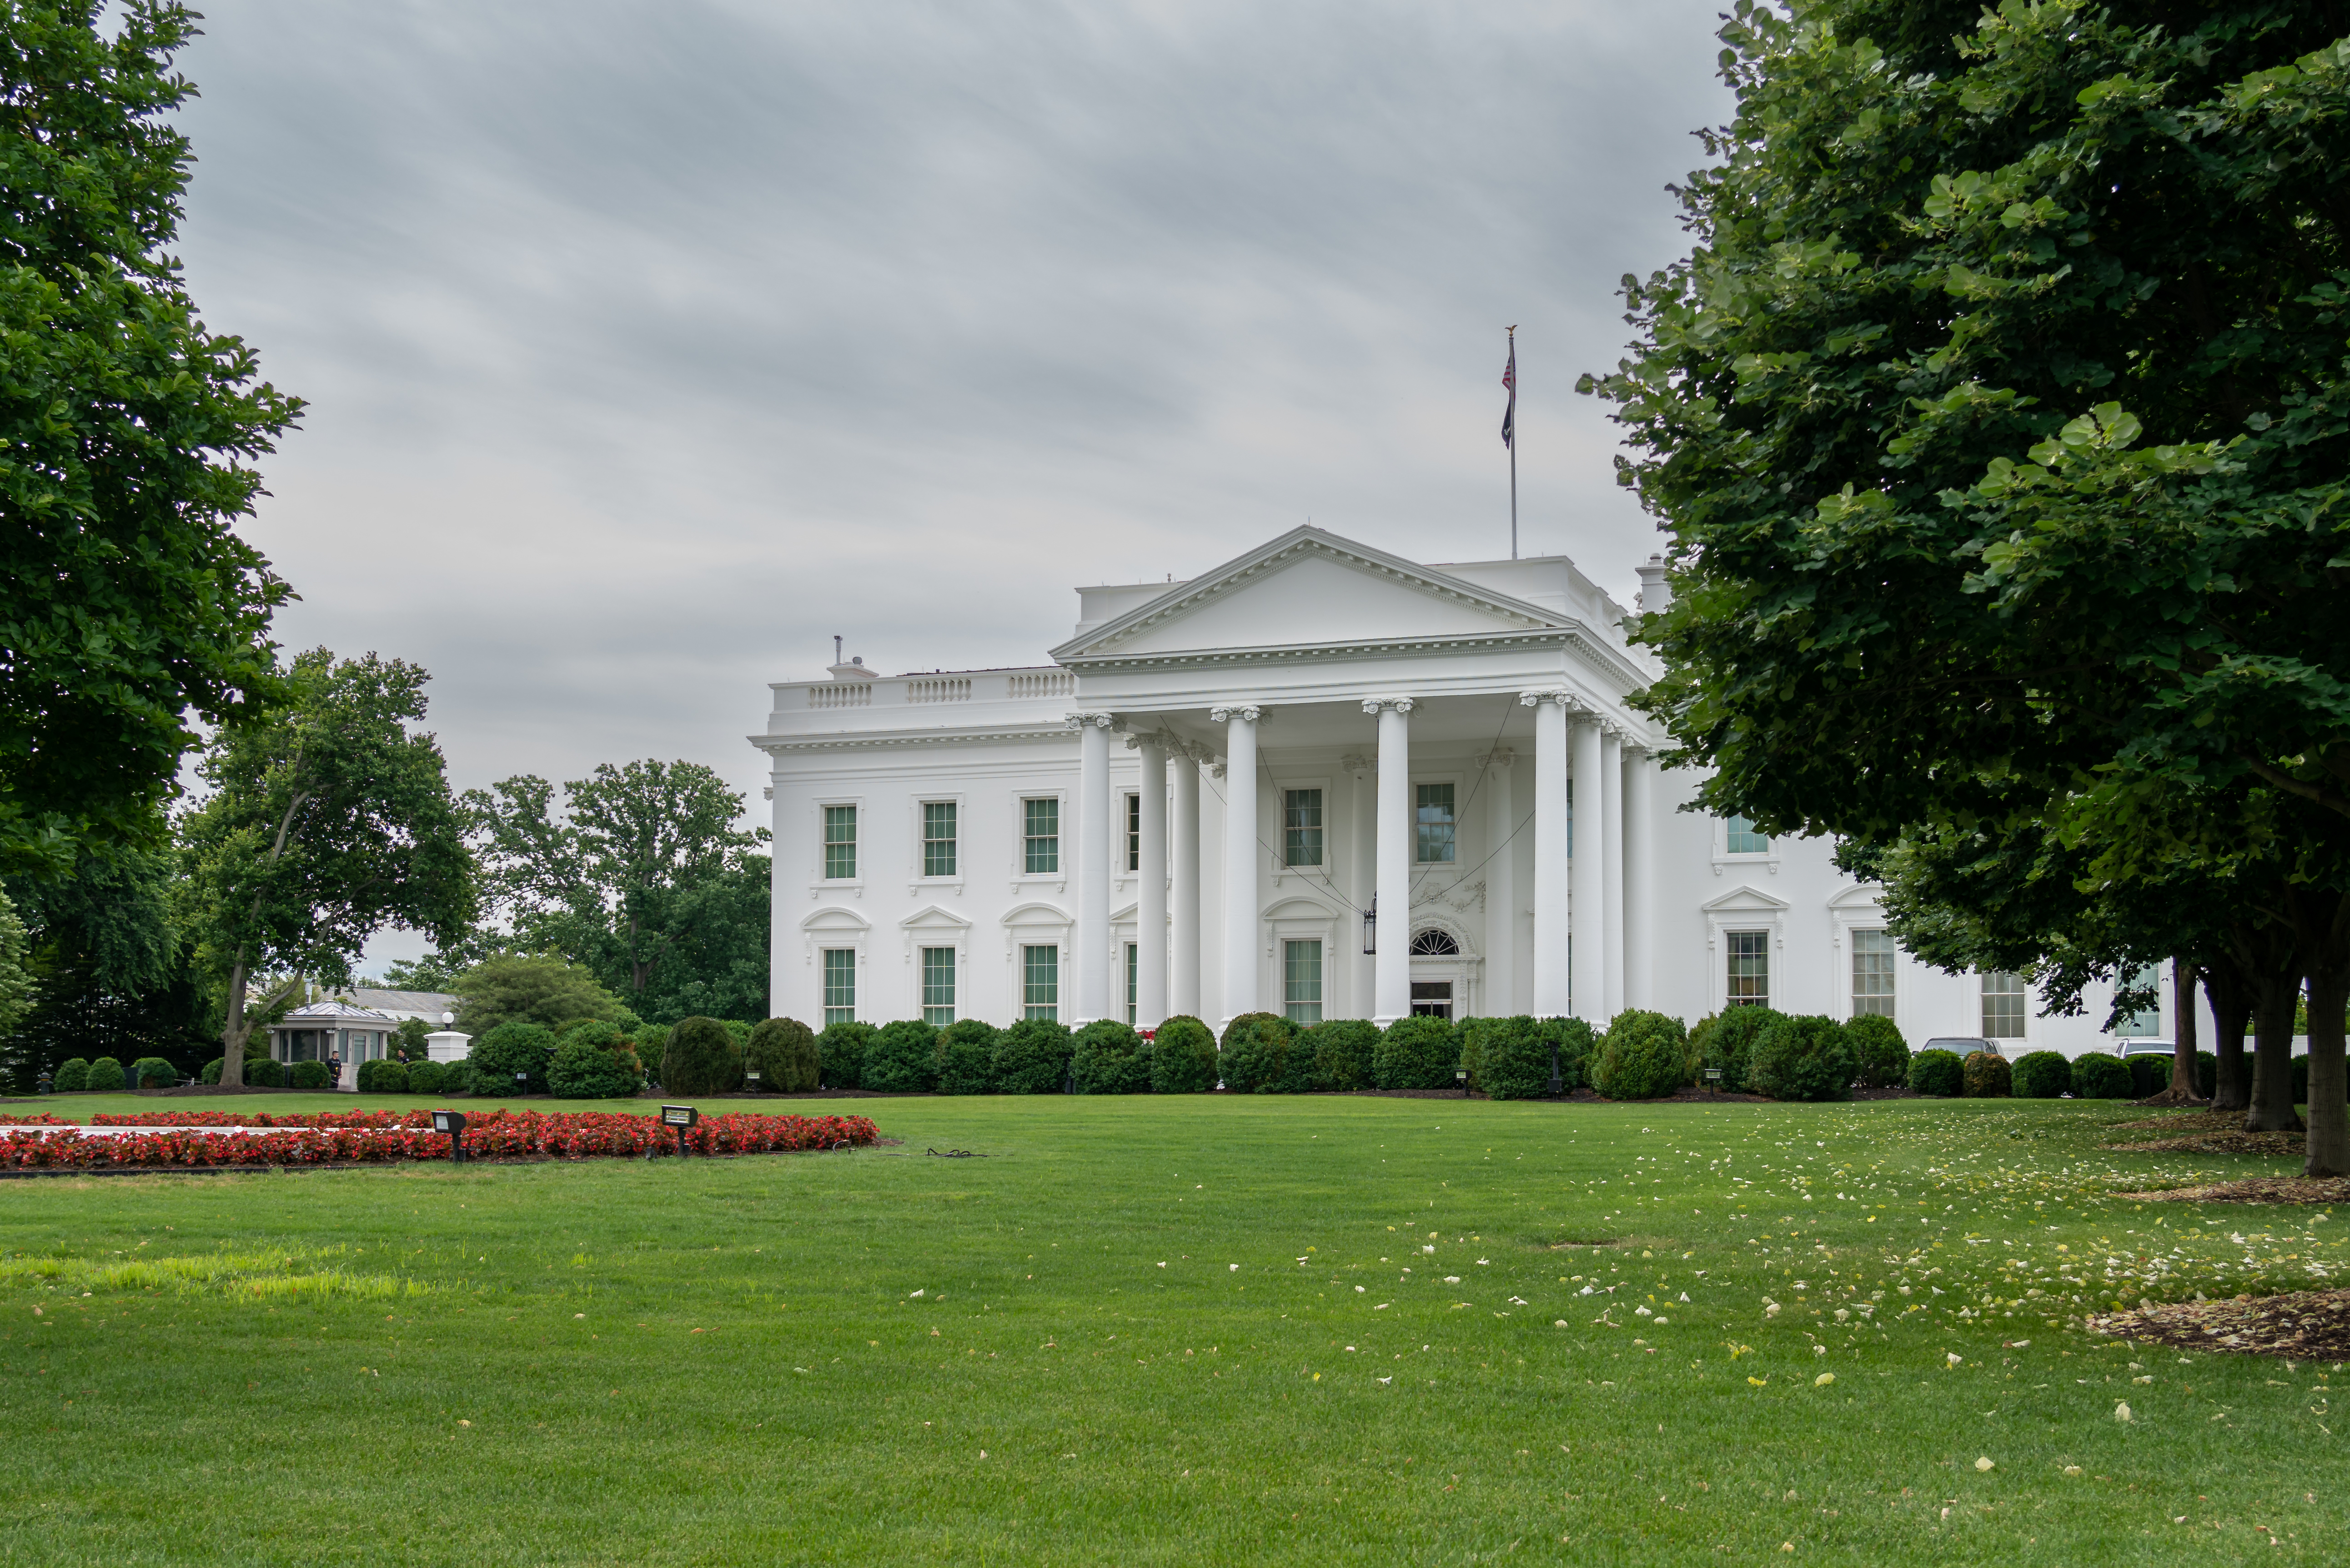 Photo of the White House.